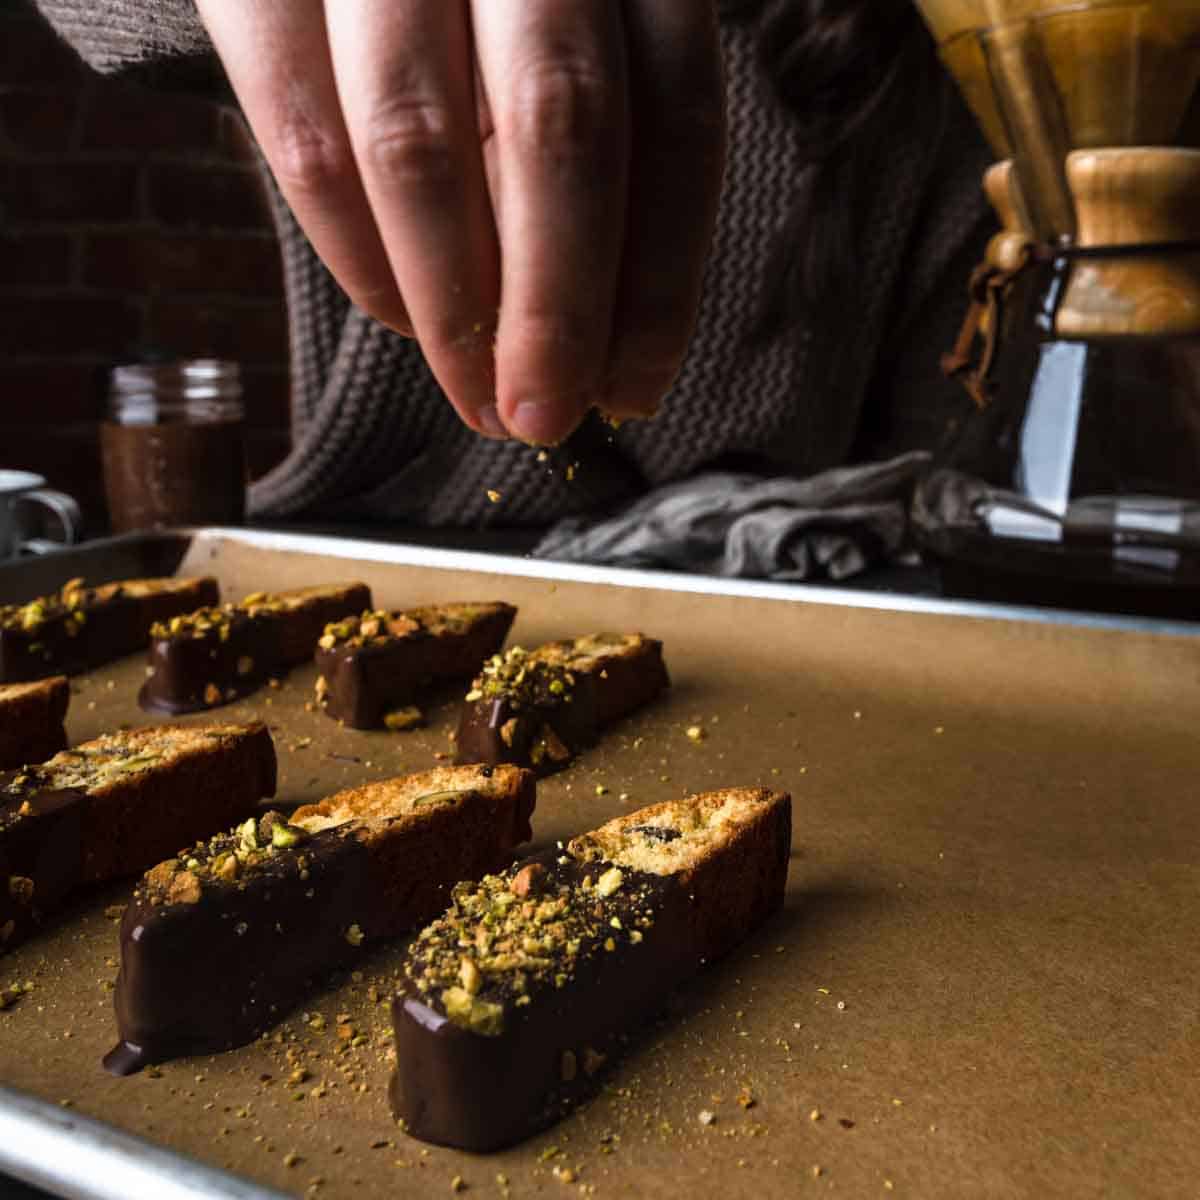 Sprinkling chopped pistachios on chocolate dipped biscotti